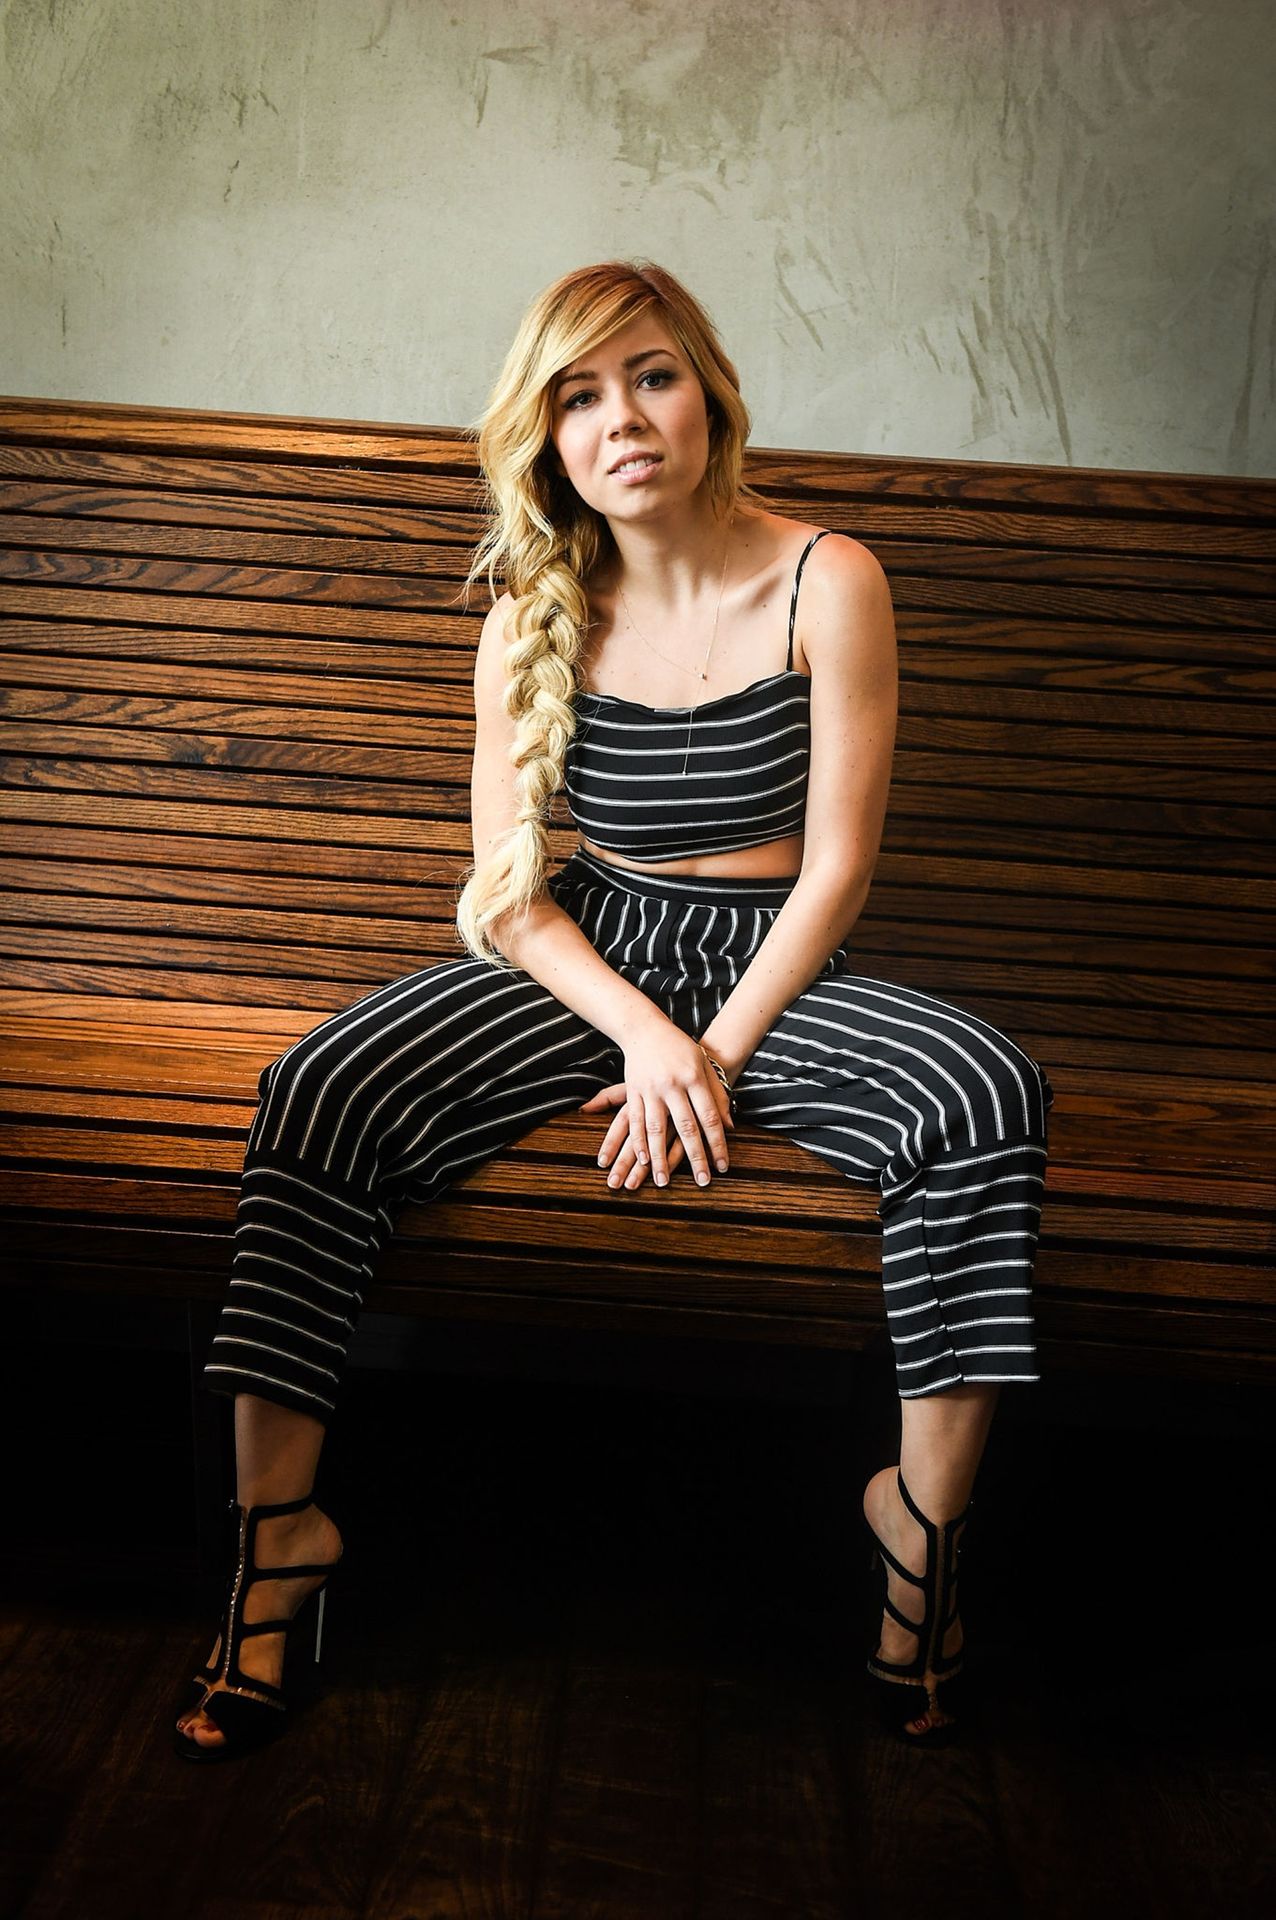 Mccurdy icloud jennette Future of